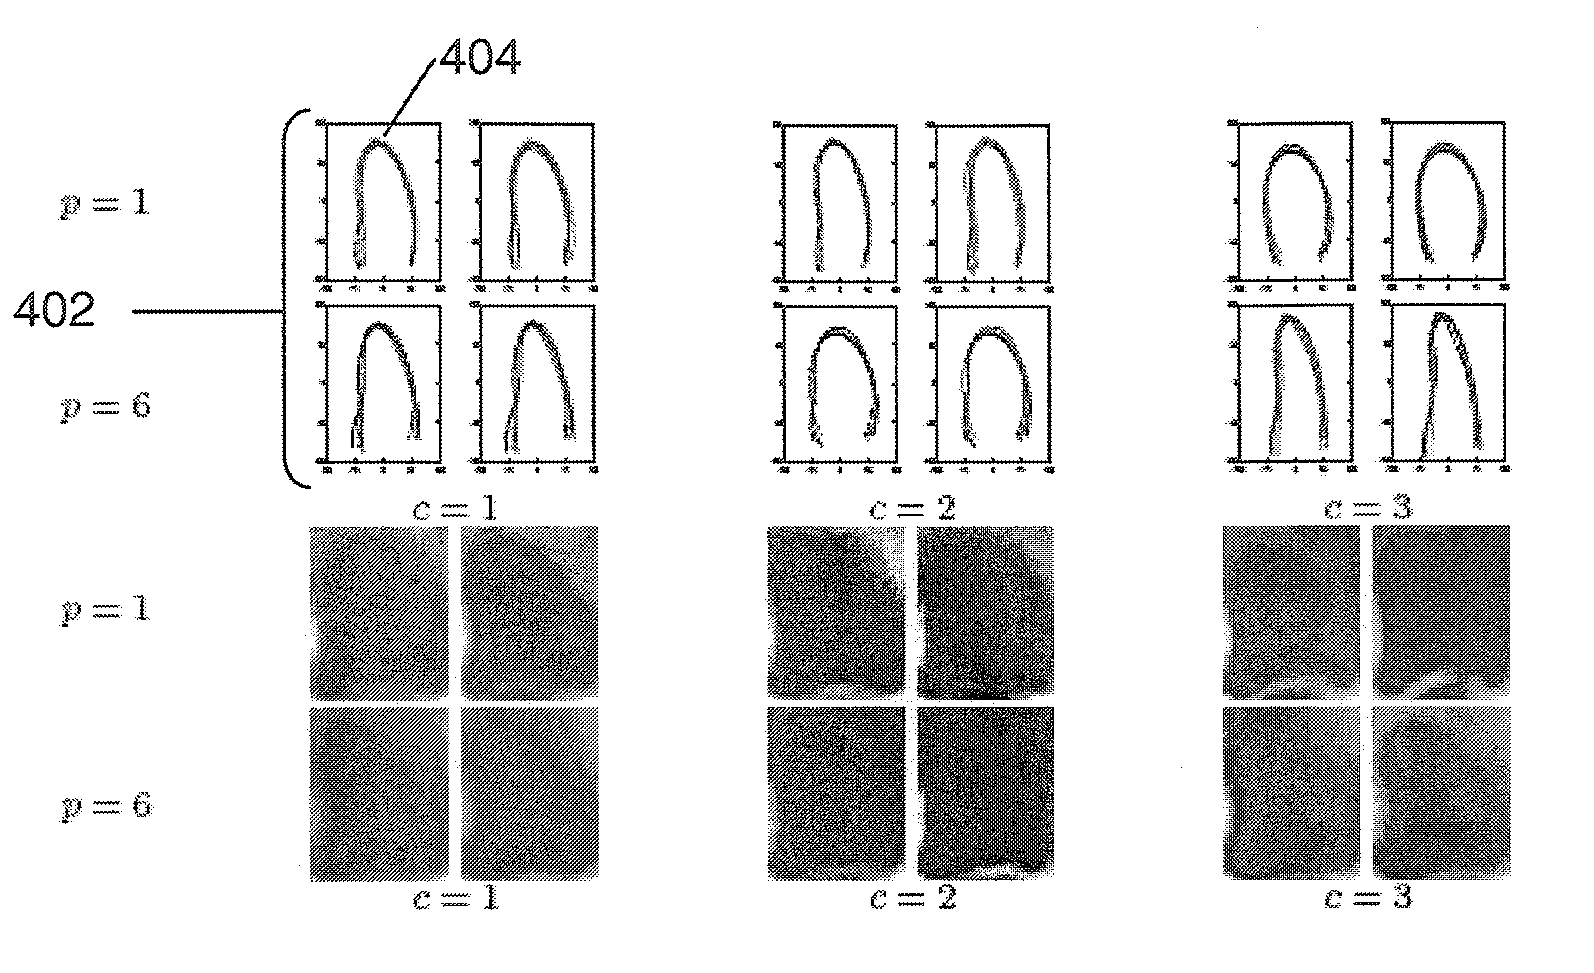 Method for characterizing shape, appearance and motion of an object that is being tracked